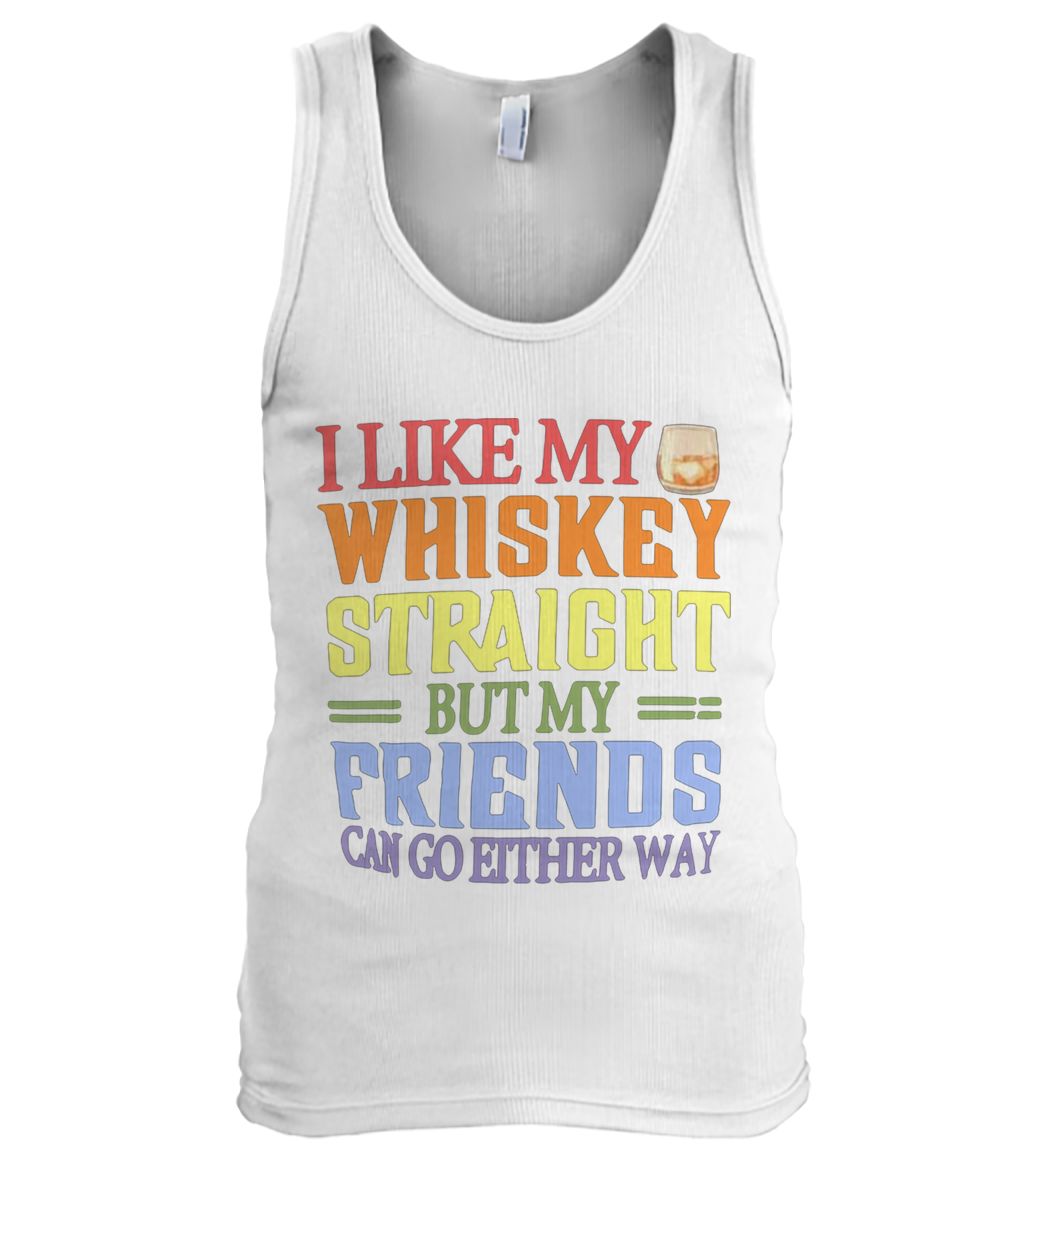 I like my whiskey straight but my friends can go either way men's tank top